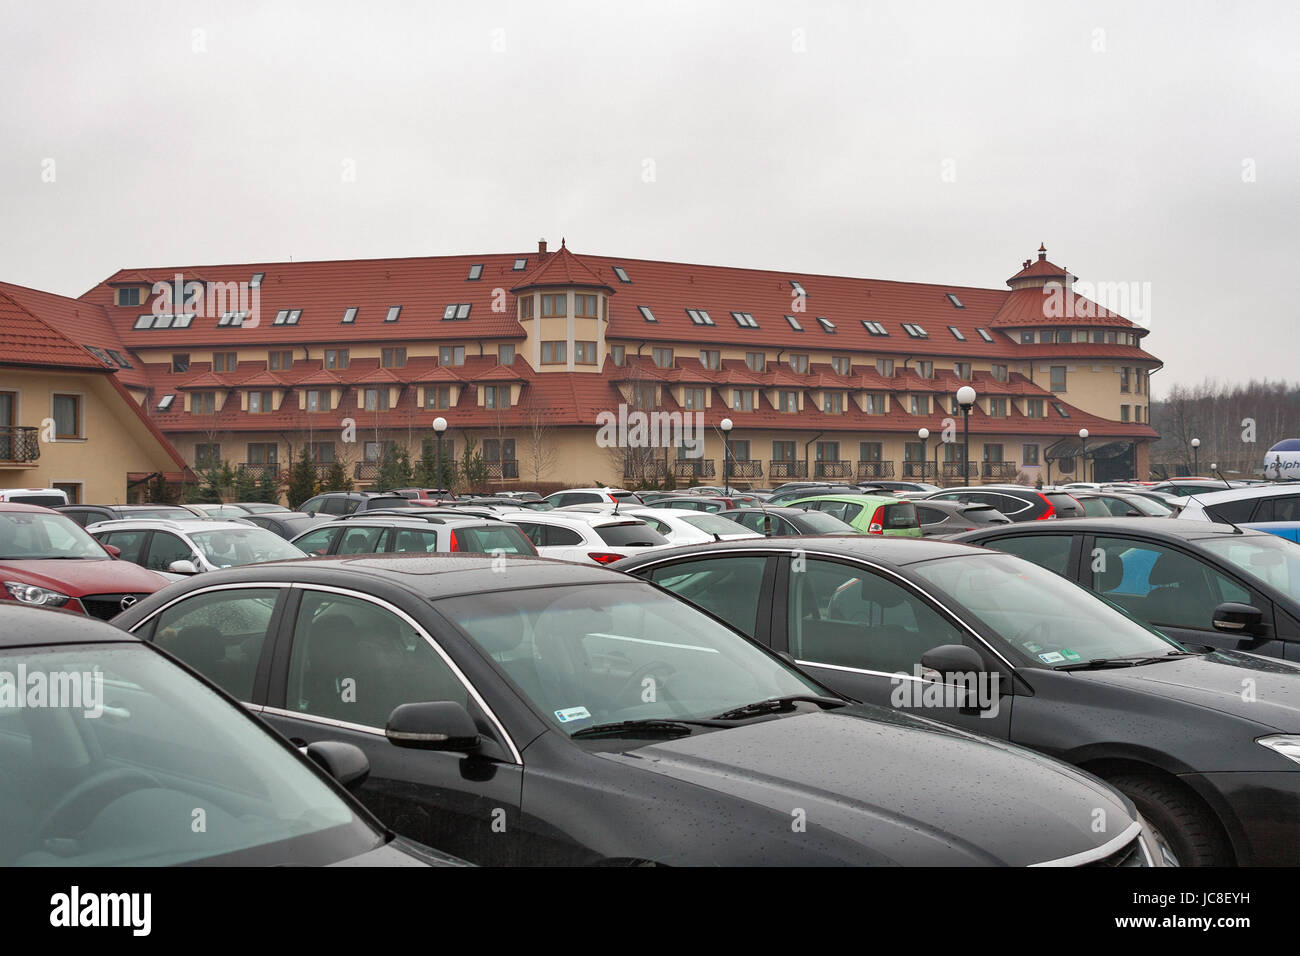 RAWA MAZOWIECKA, POLAND - MARCH 07, 2015: Cars parked in front of luxury Hotel Ossa Congress and Spa during international congress. Hotel is situated  Stock Photo